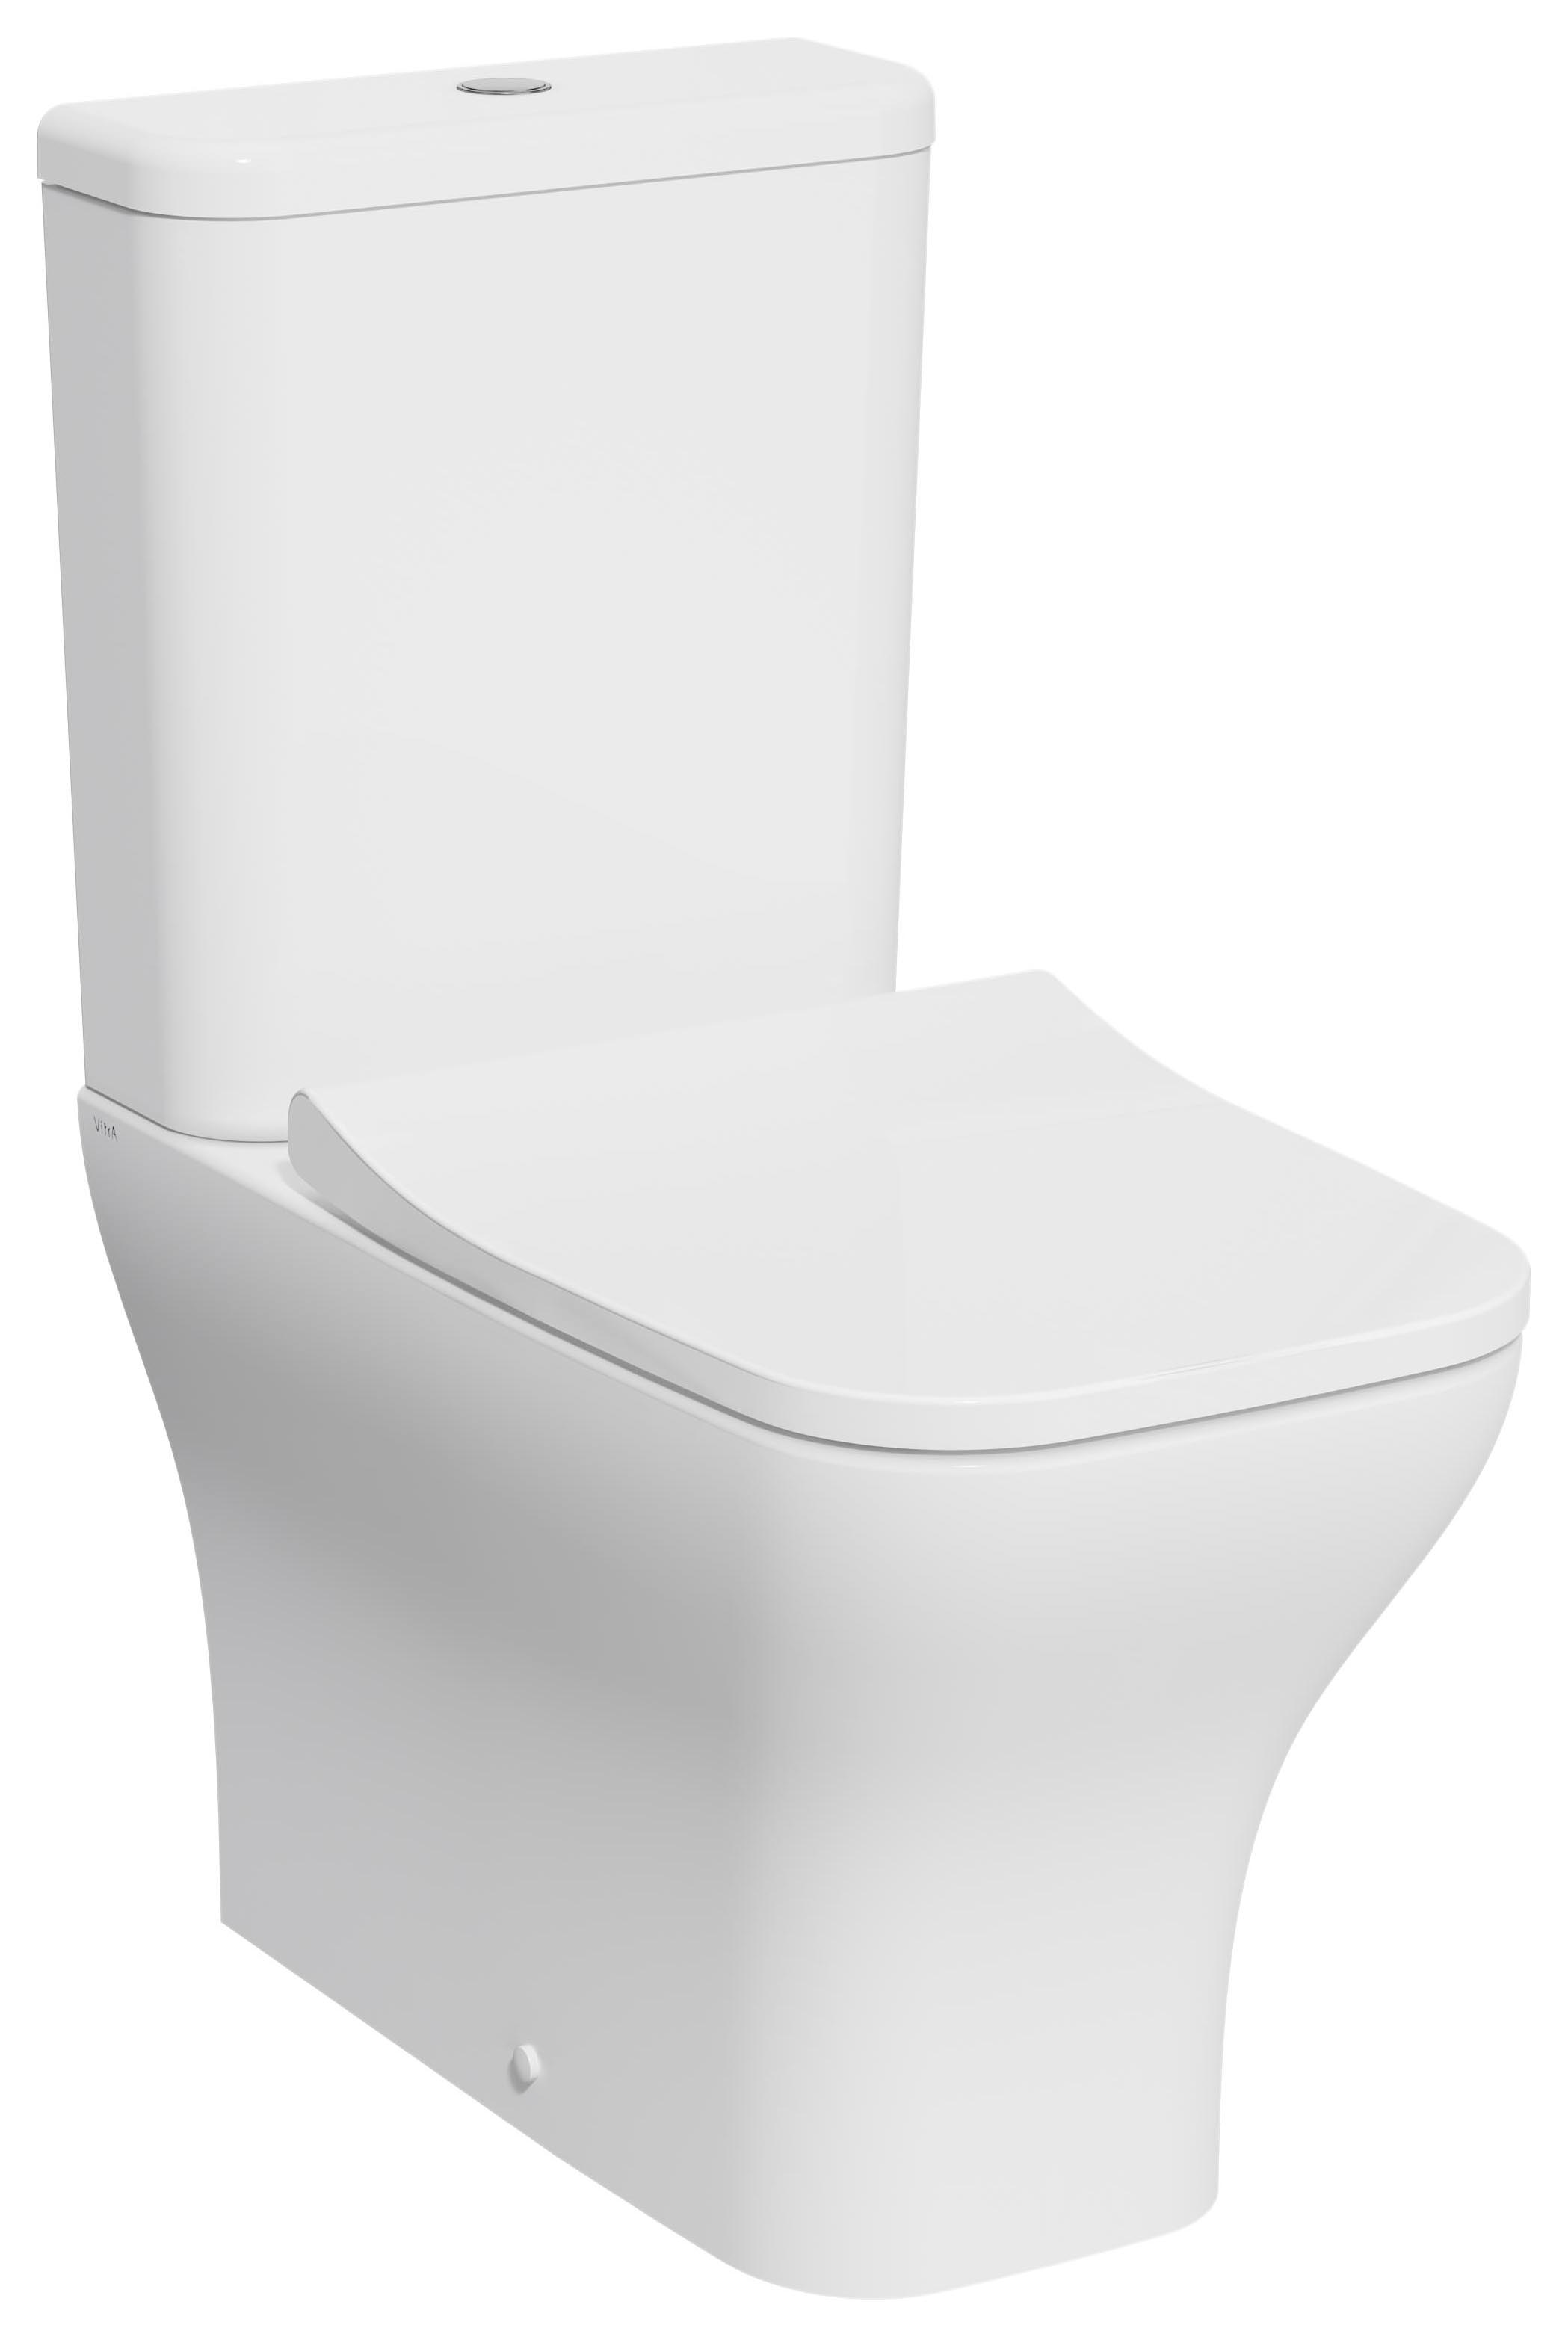 Kerala Square Smooth Flush Fully Shrouded Close Coupled Toilet Pan  Cistern & Soft Close Seat